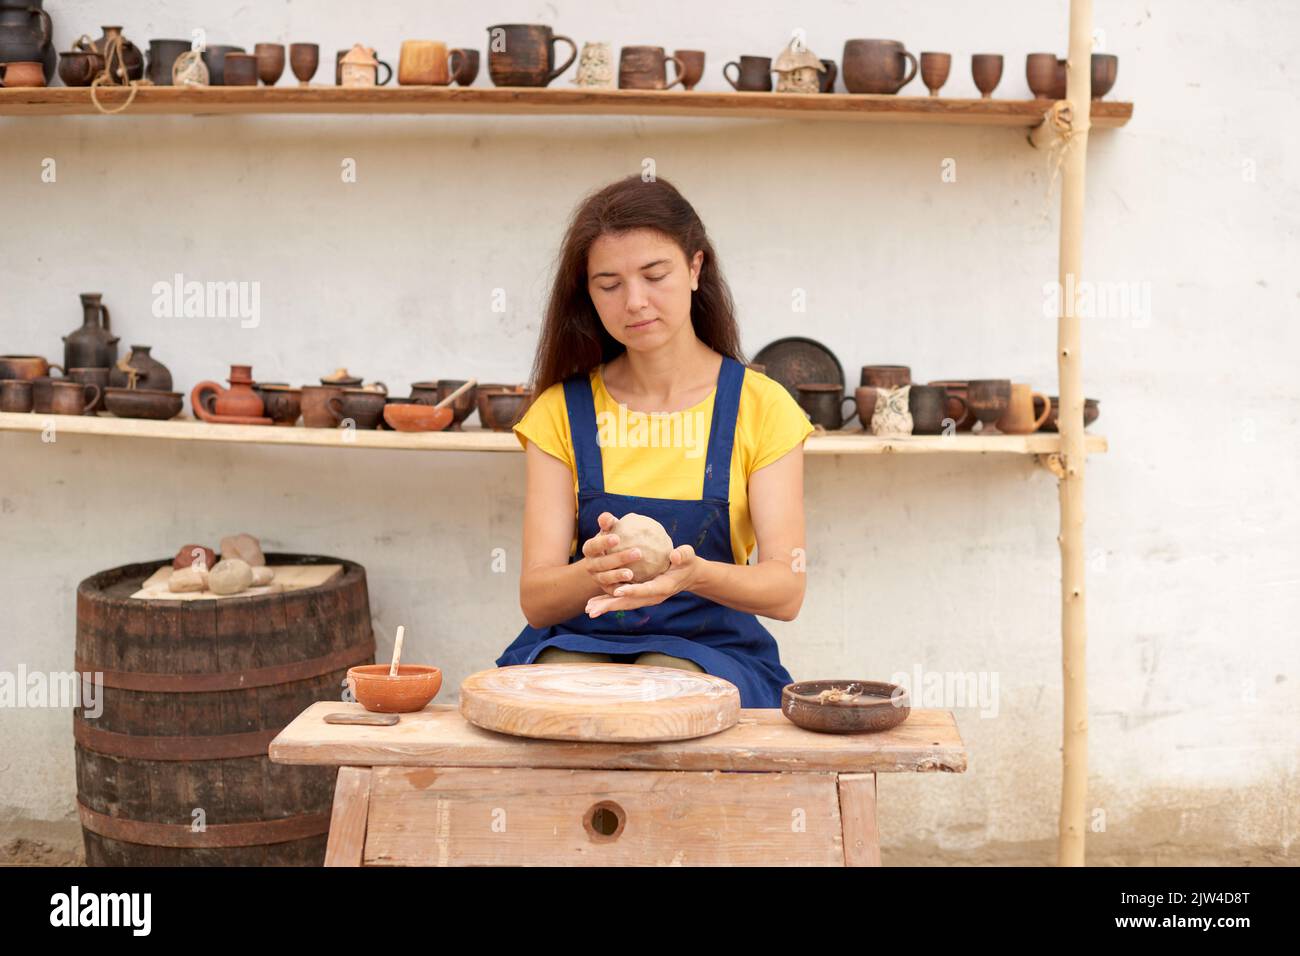 woman in blue apron and yellow T-shirt works on mechanical potter's wheel against background of shelves of clay products Stock Photo